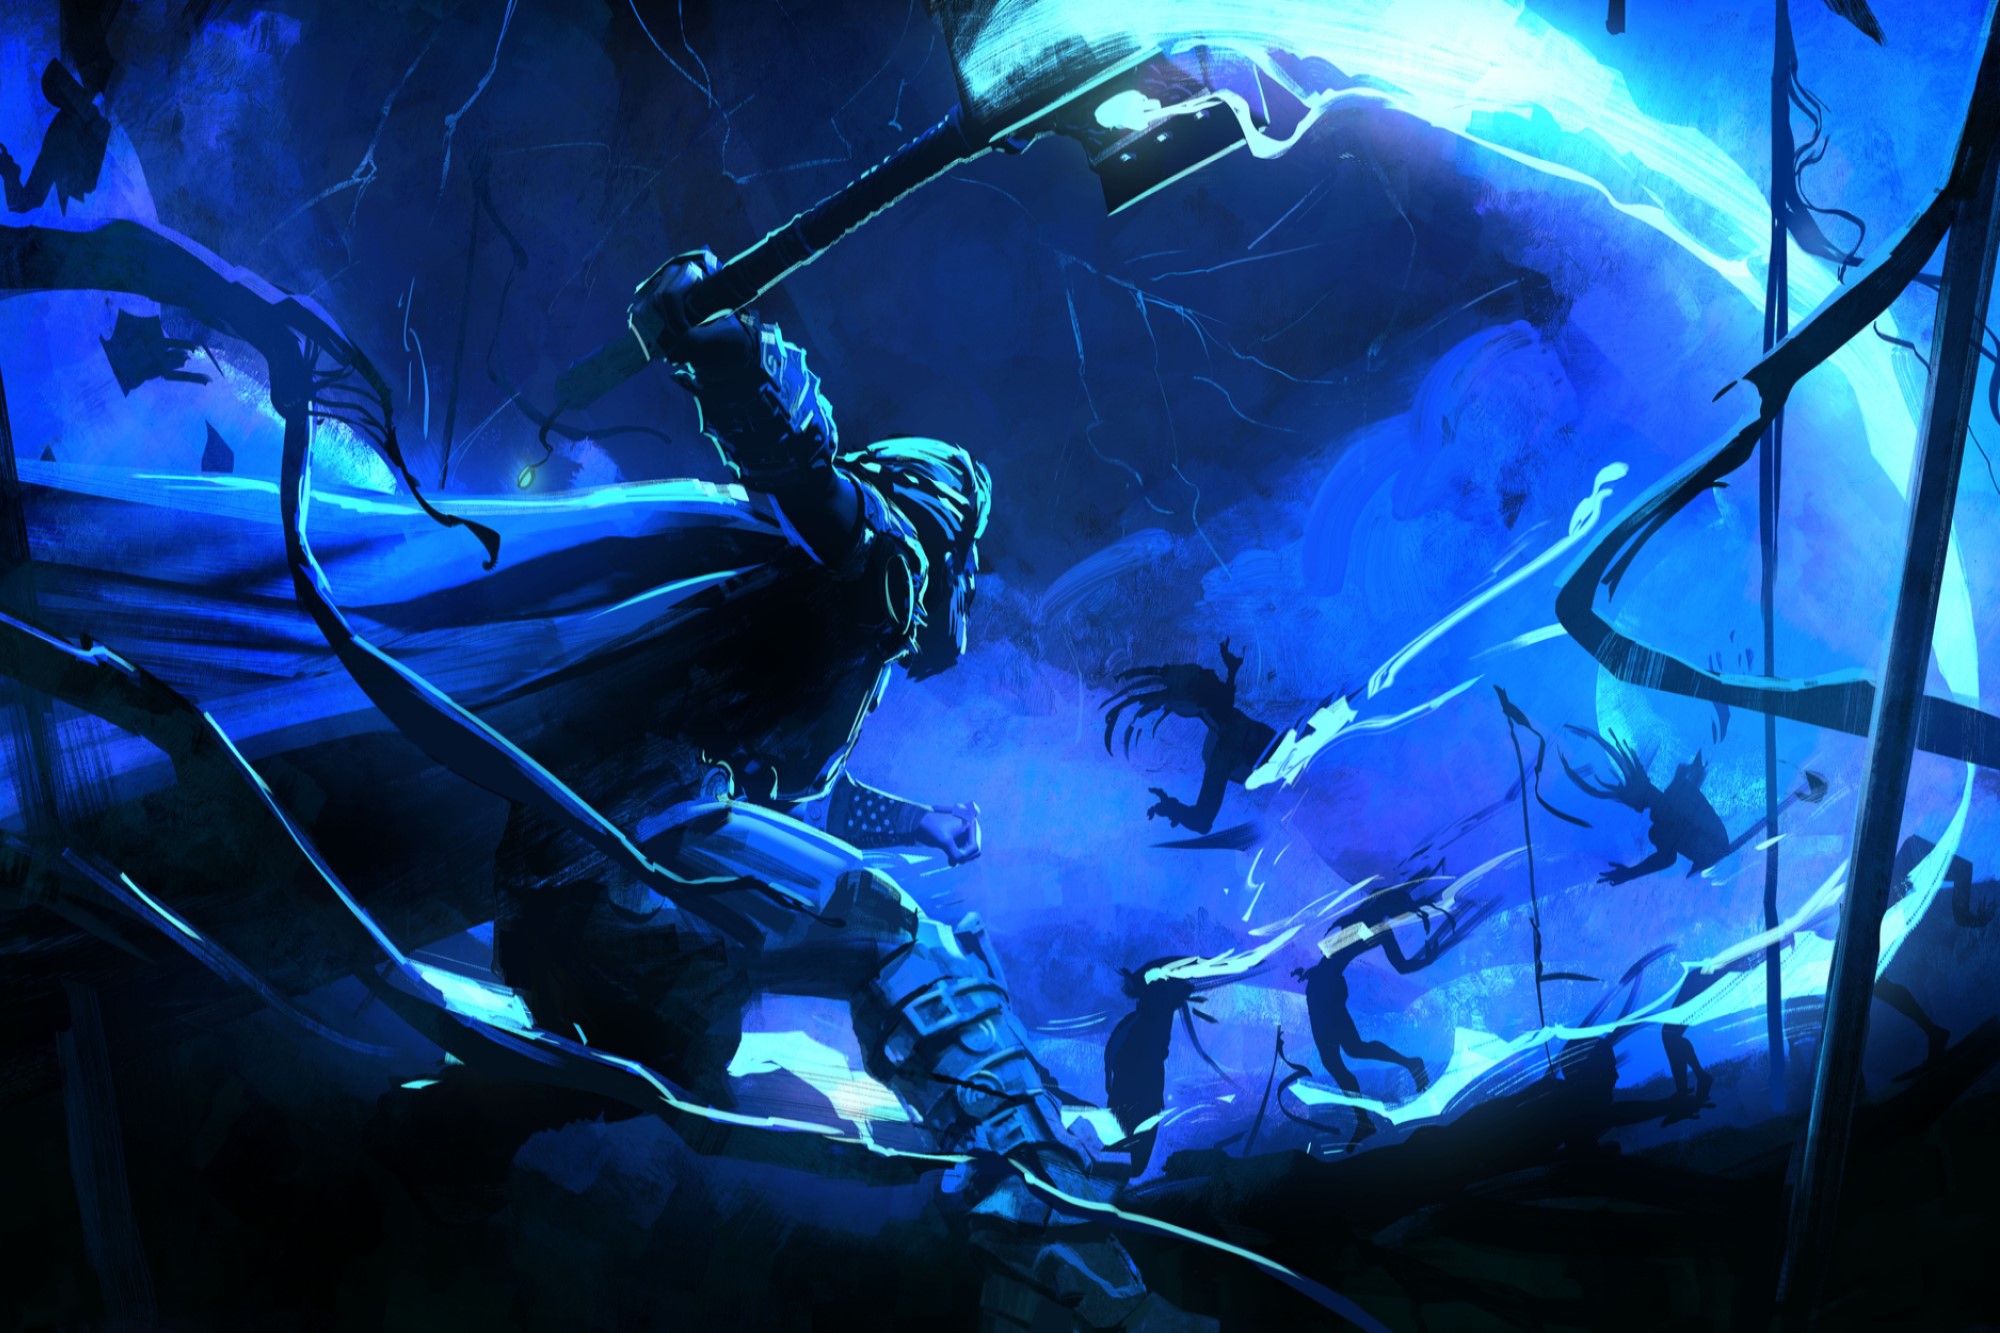 drawing of Thor battling silhouettes in storm